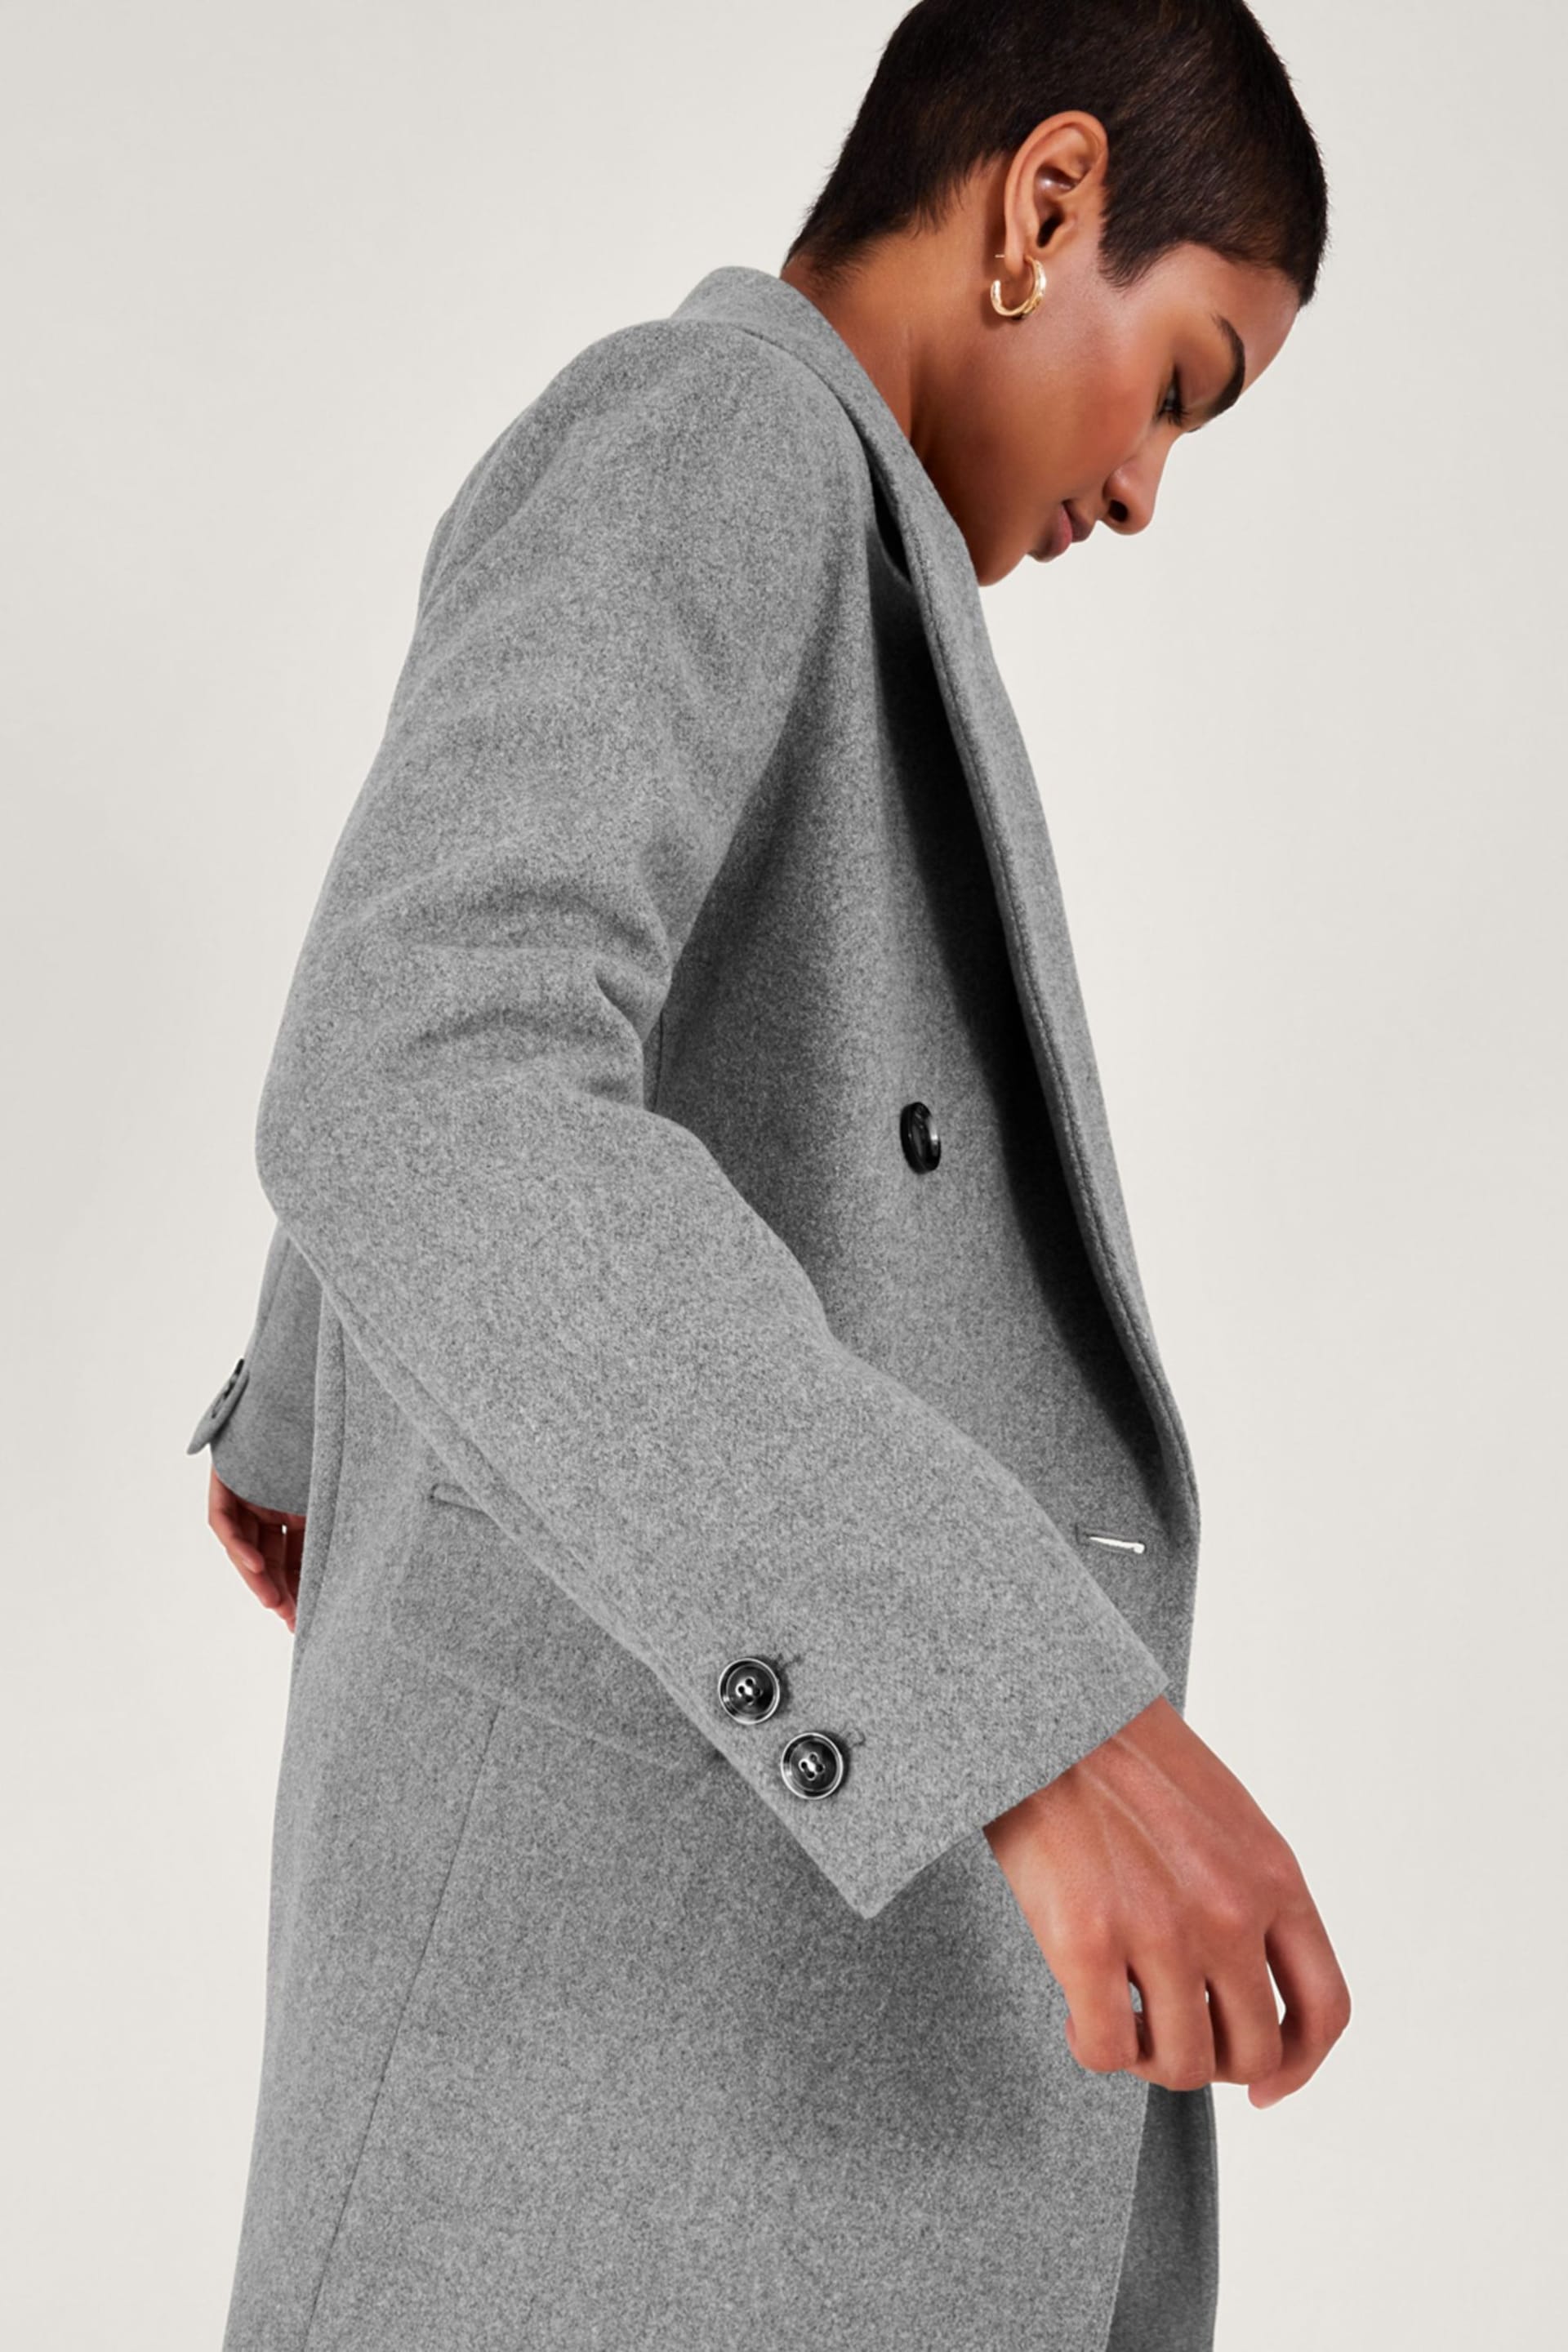 Monsoon Grey Fay Double Breasted Coat - Image 3 of 5